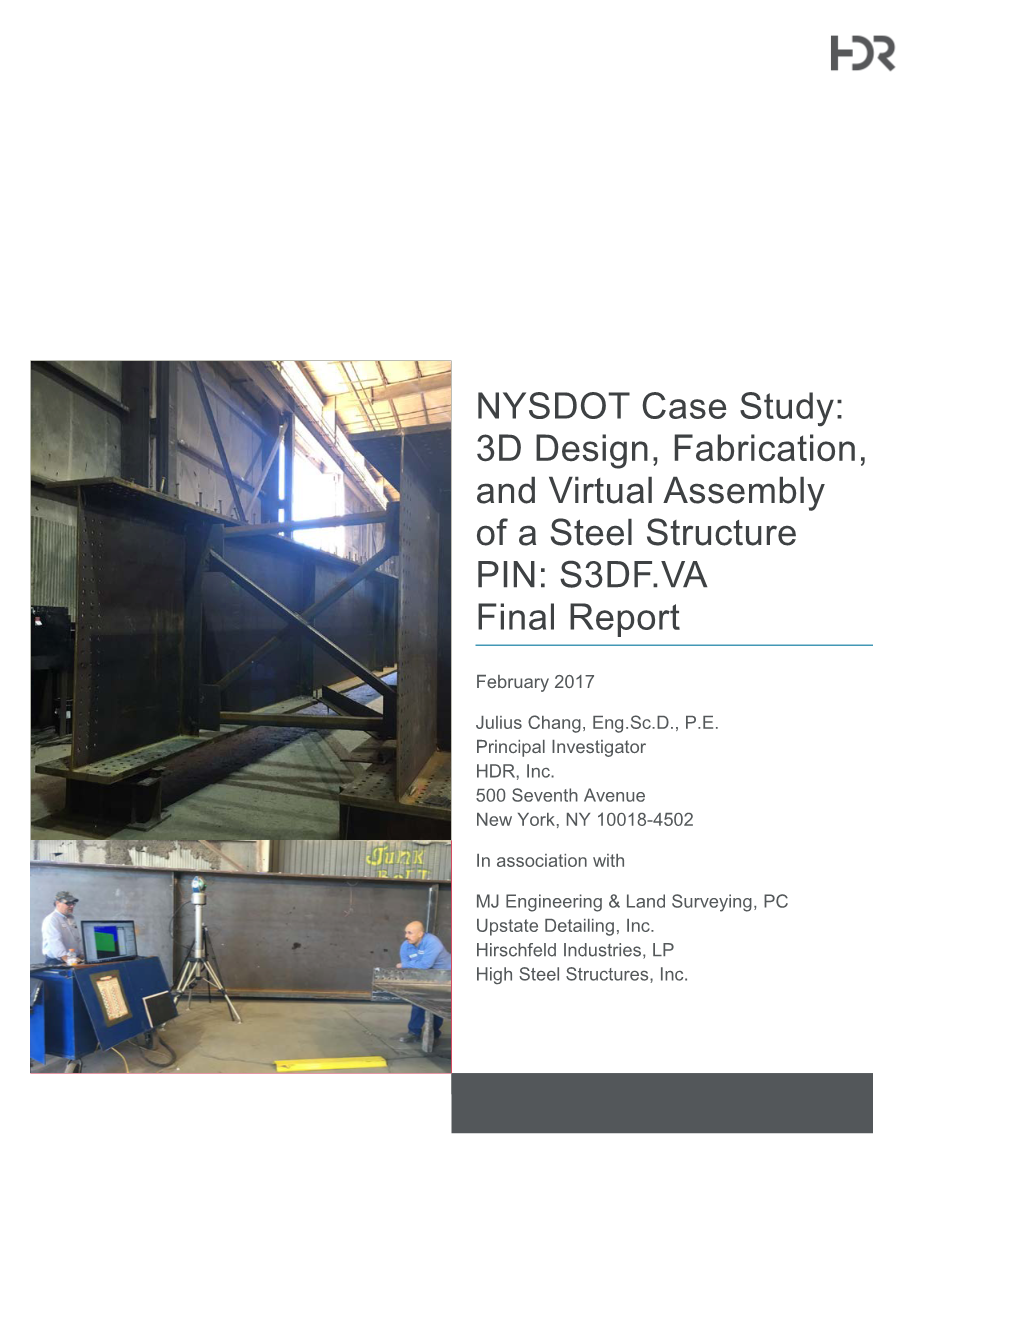 NYSDOT Case Study: 3D Design, Fabrication, and Virtual Assembly of a Steel Structure PIN: S3DF.VA Final Report